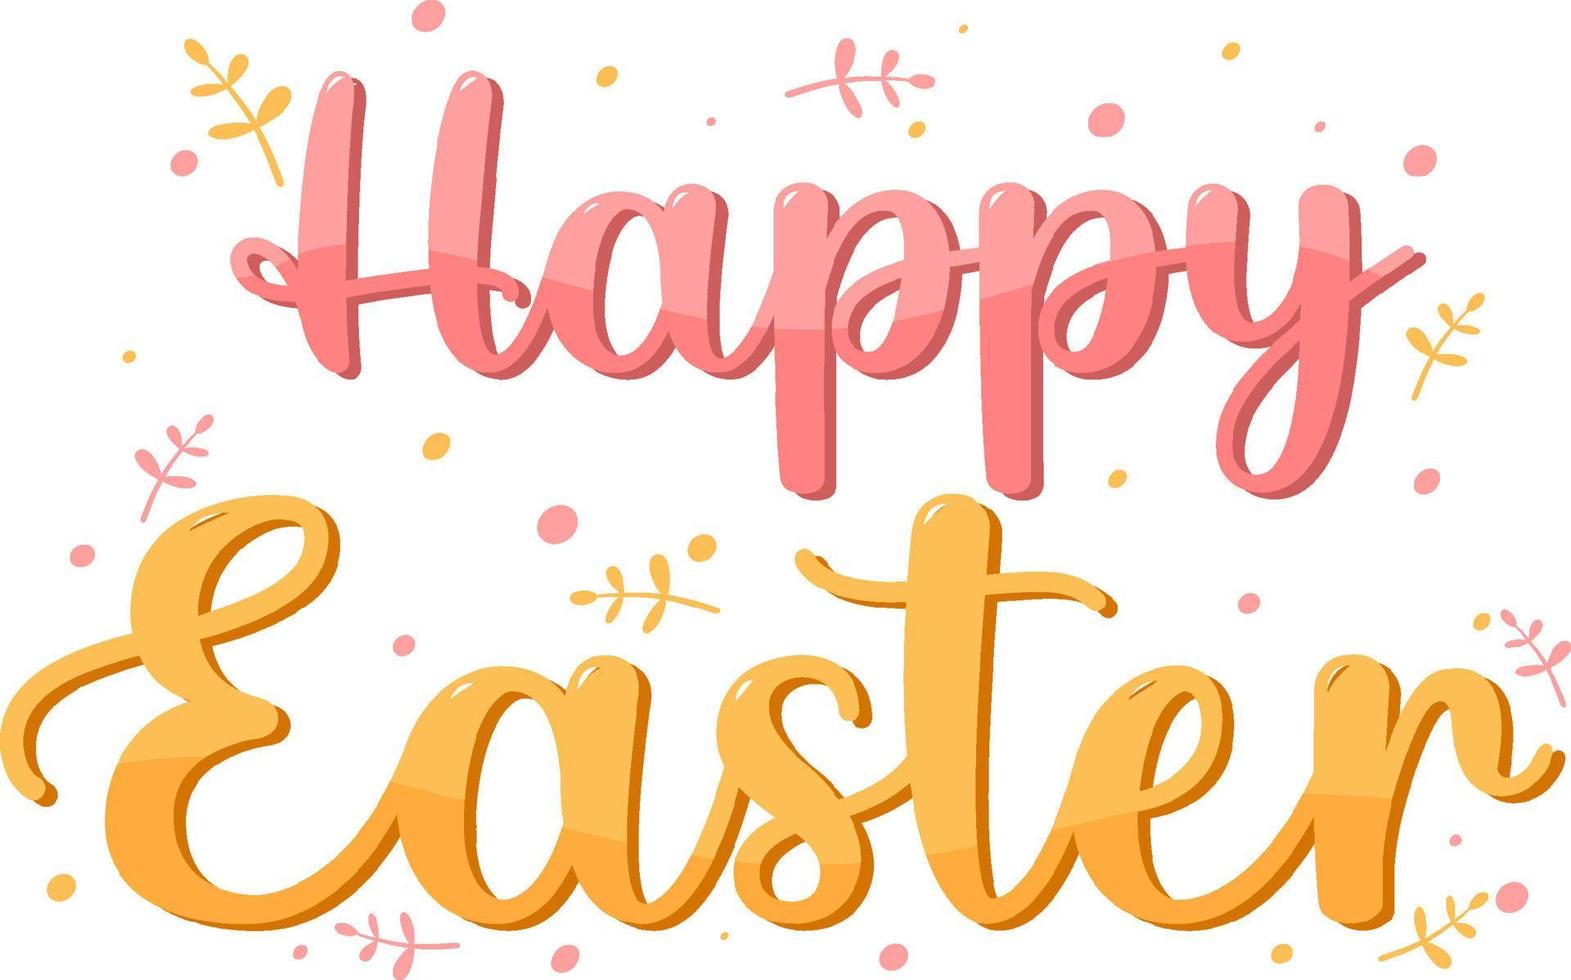 Happy Easter design with pink and orange font vector